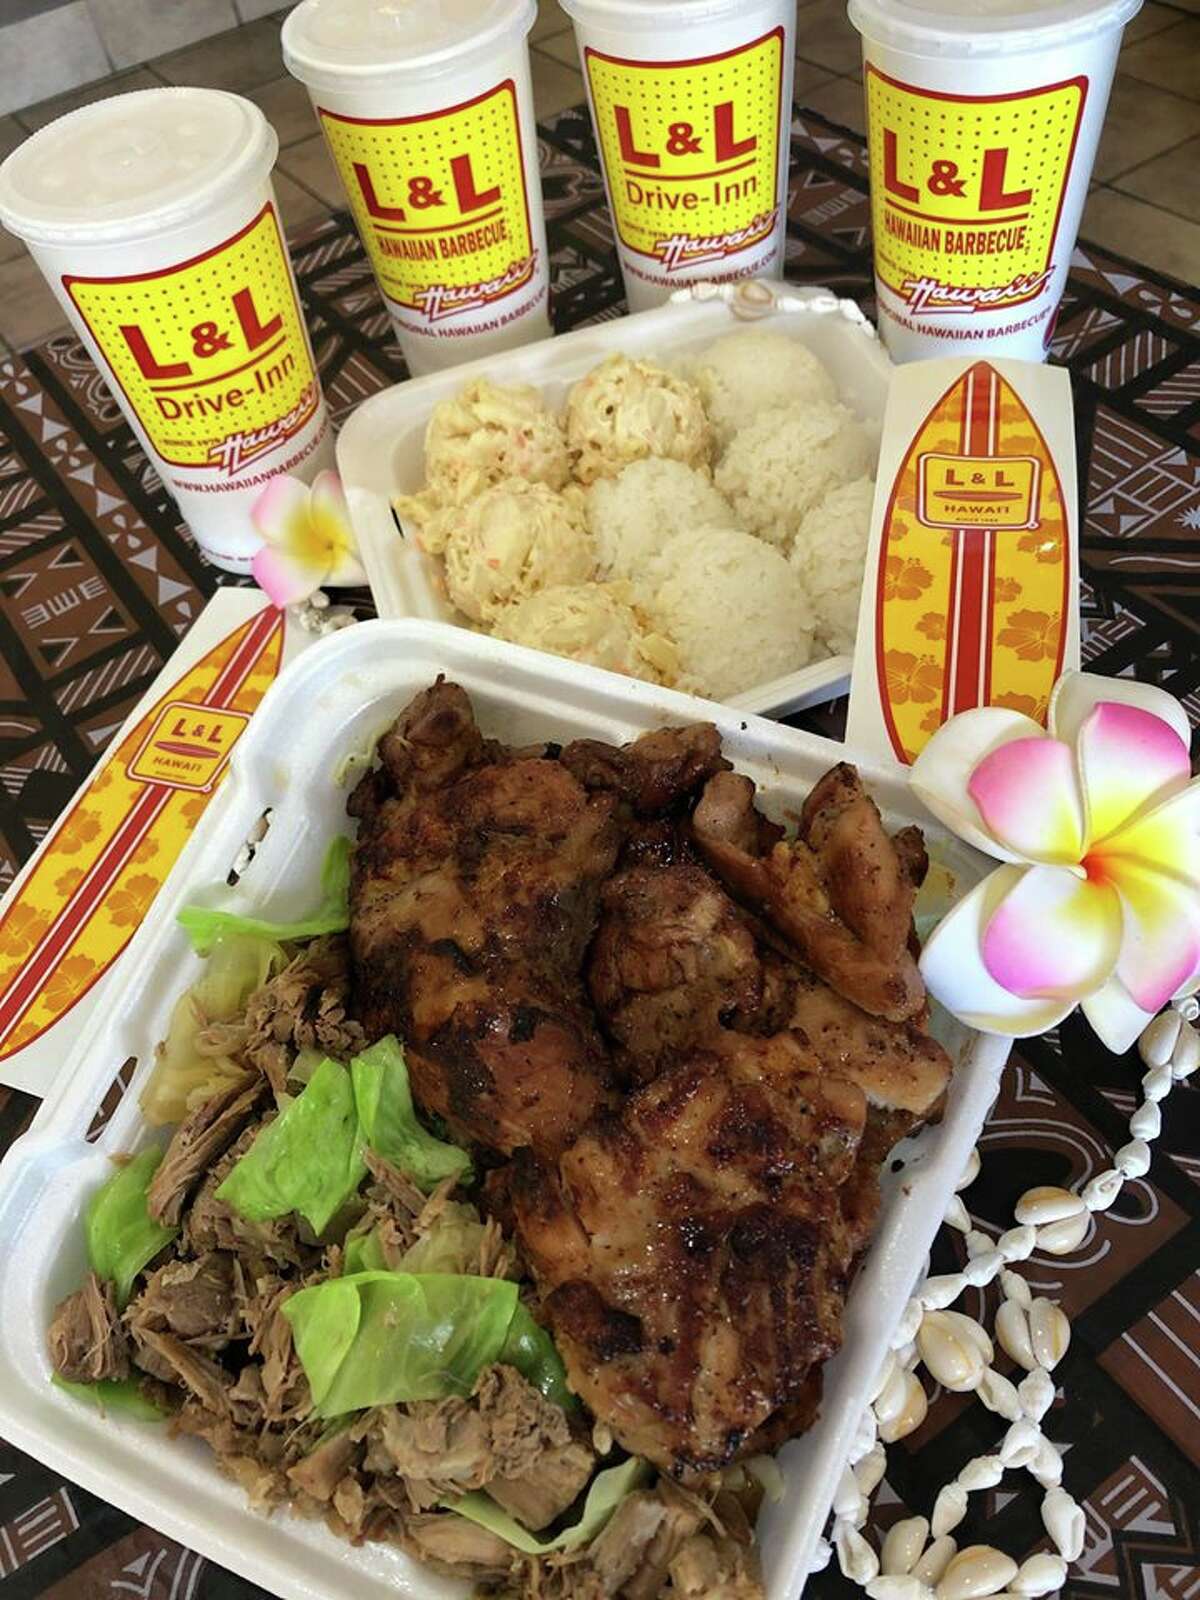 L & L Hawaiian Barbecue: For $24.99, you can get six pieces of barbecue chicken, 14 ounces of kalua pork, cabbage mac salad, steamed rice and four fountain drinks. Location: 1302 Austin Hwy Ste 1; 210-474-6699; curbside and carryout (Doordash) available; Monday through Sunday 11 a.m. to 8 p.m.; L & L Hawaiian Barbecue.